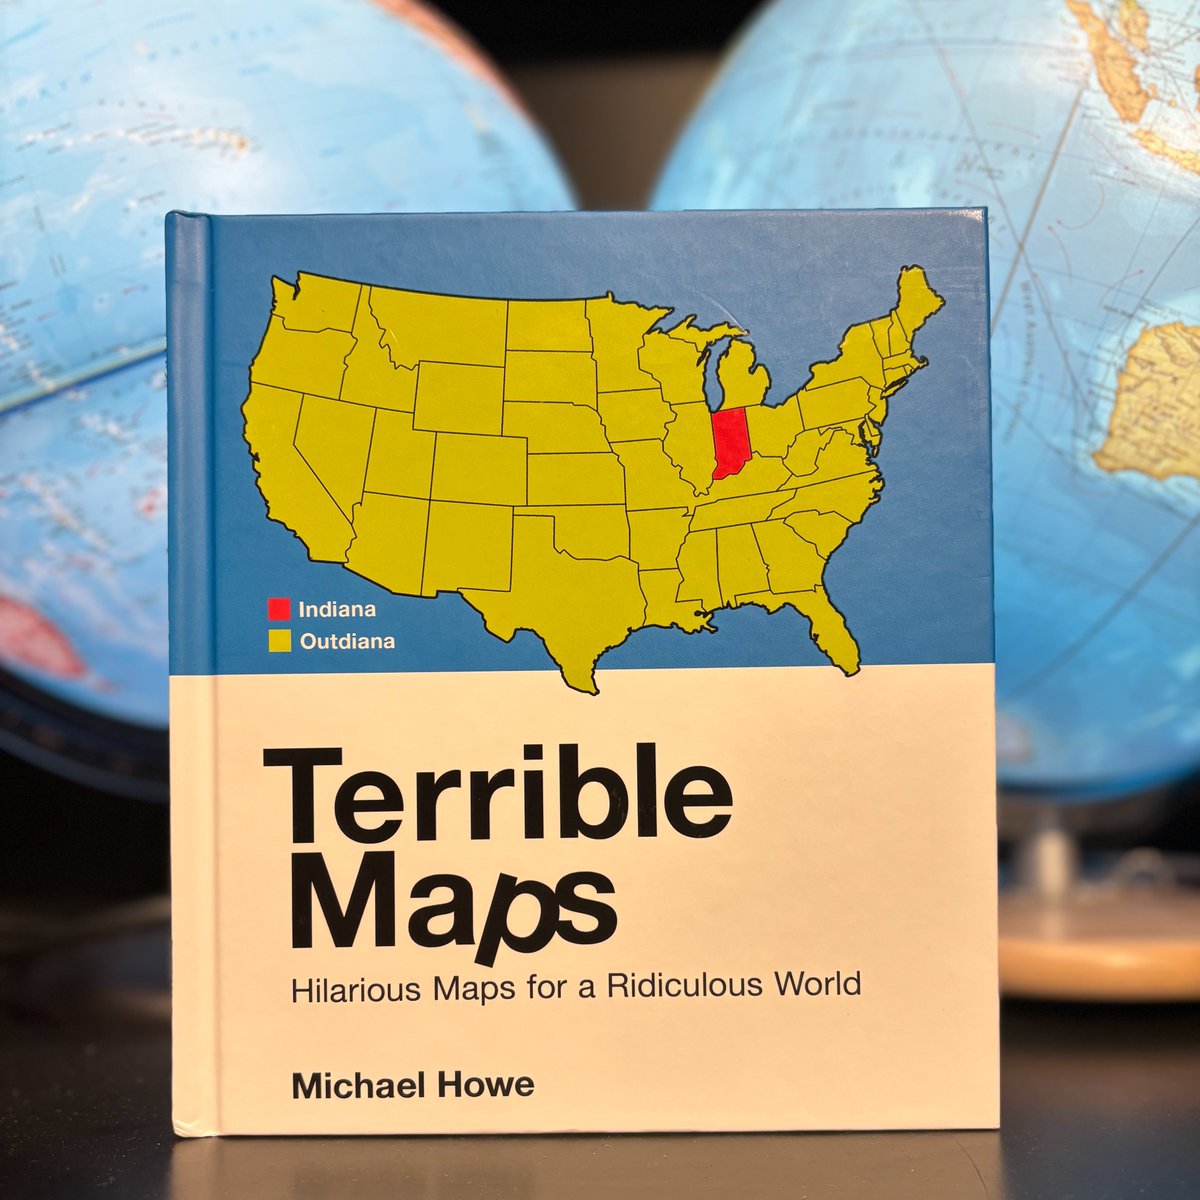 Our not so terrible friend @TerribleMaps has finally hit the US market! Congratulations🥂